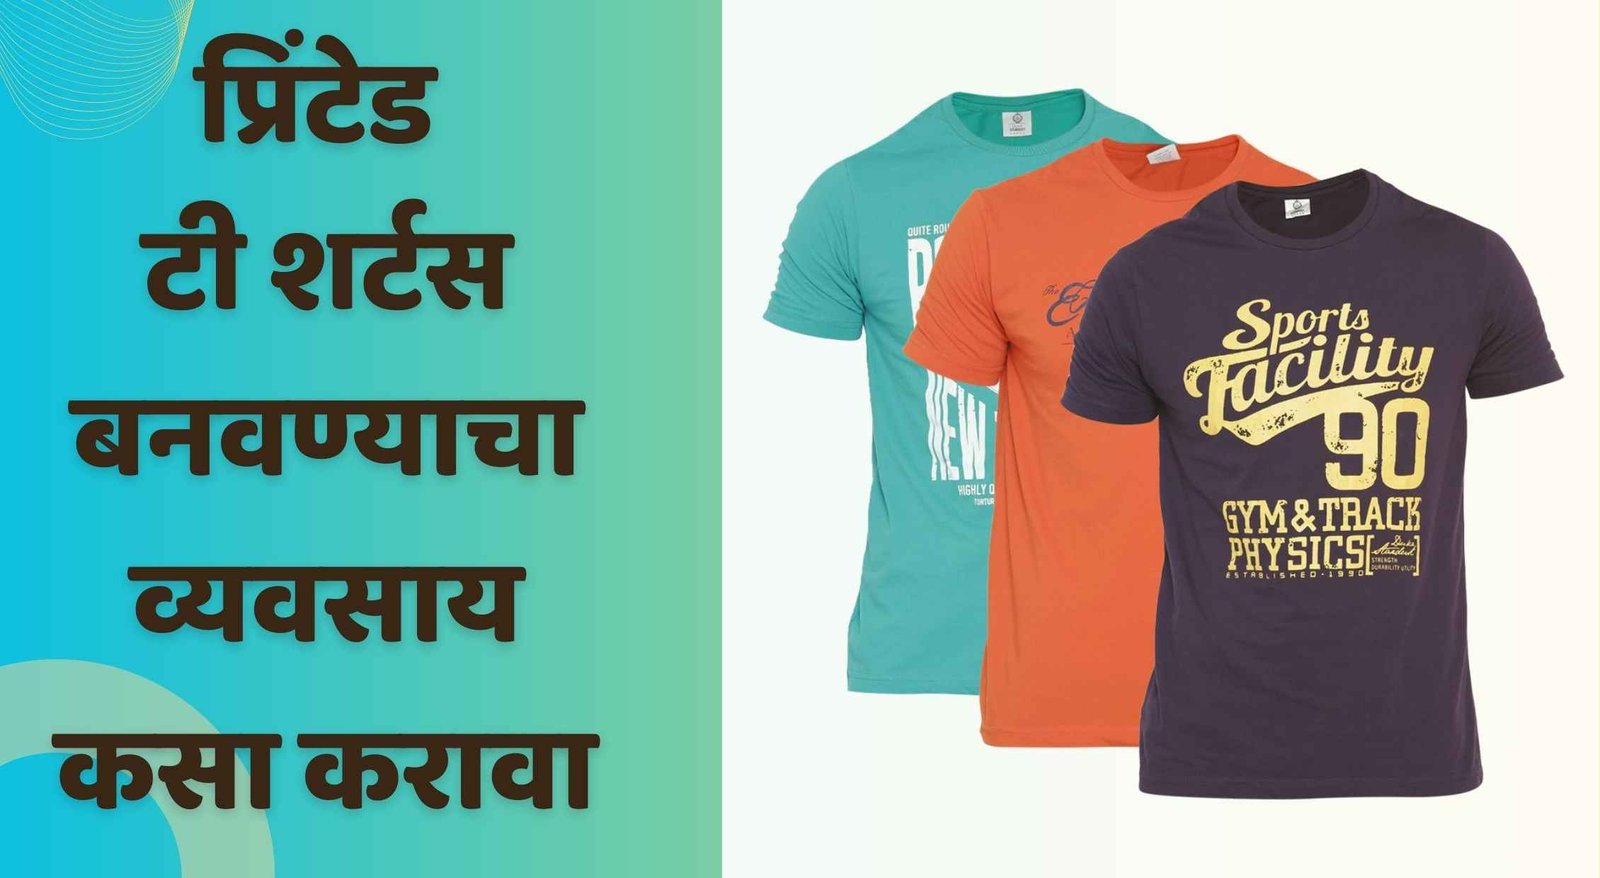 T Shirt Printing Business Ideas In Marathi